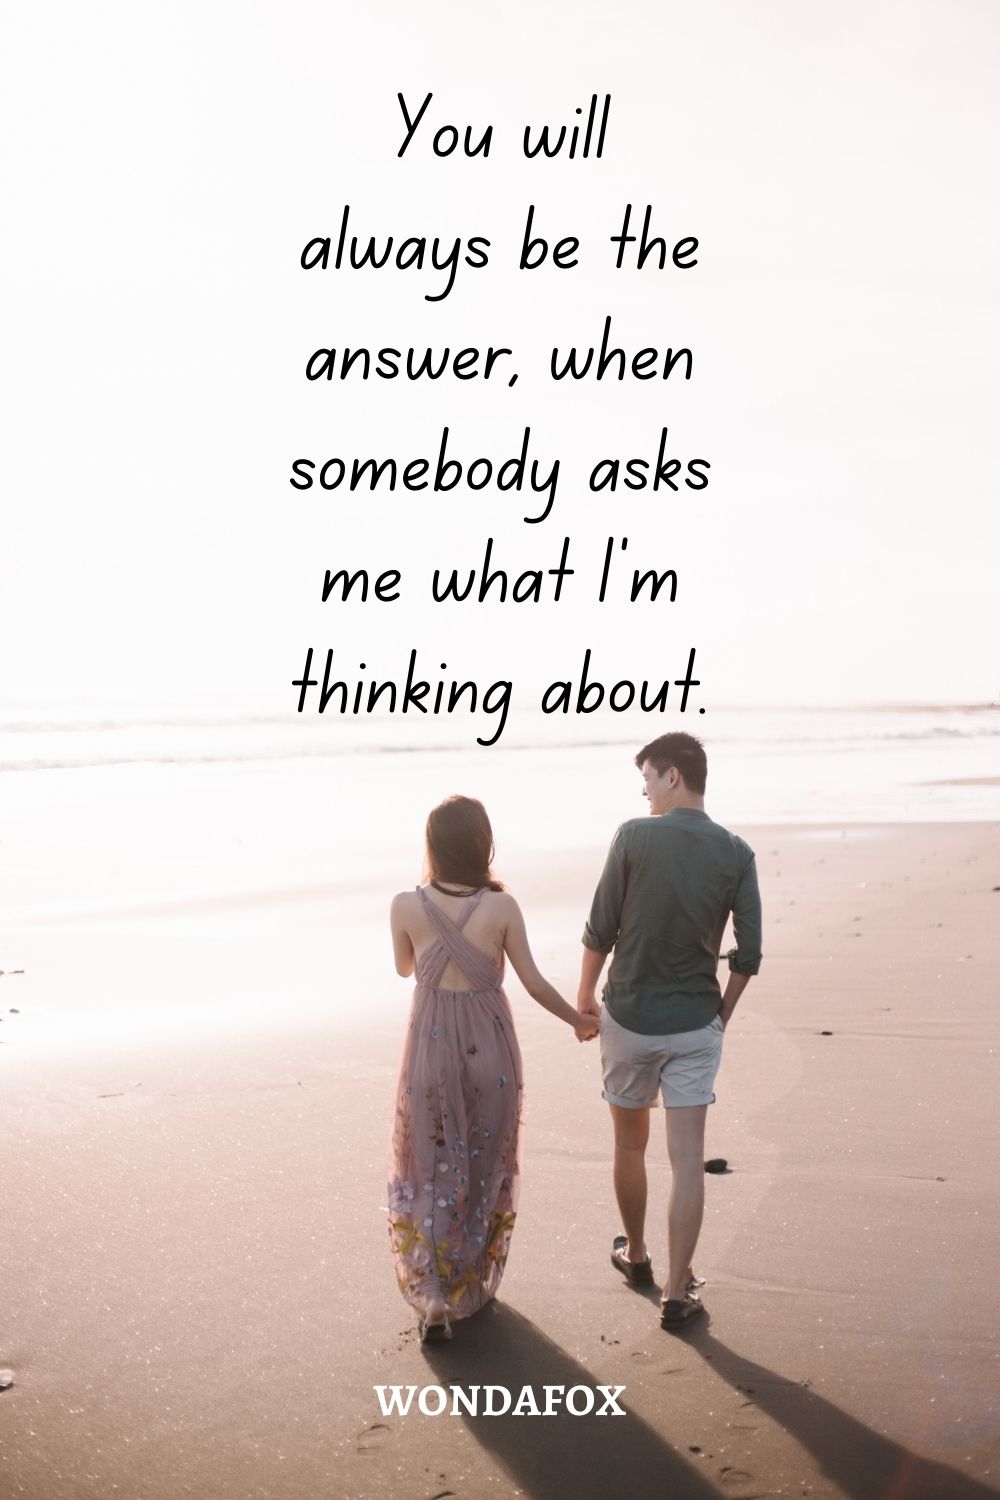 You will always be the answer, when somebody asks me what I’m thinking about.